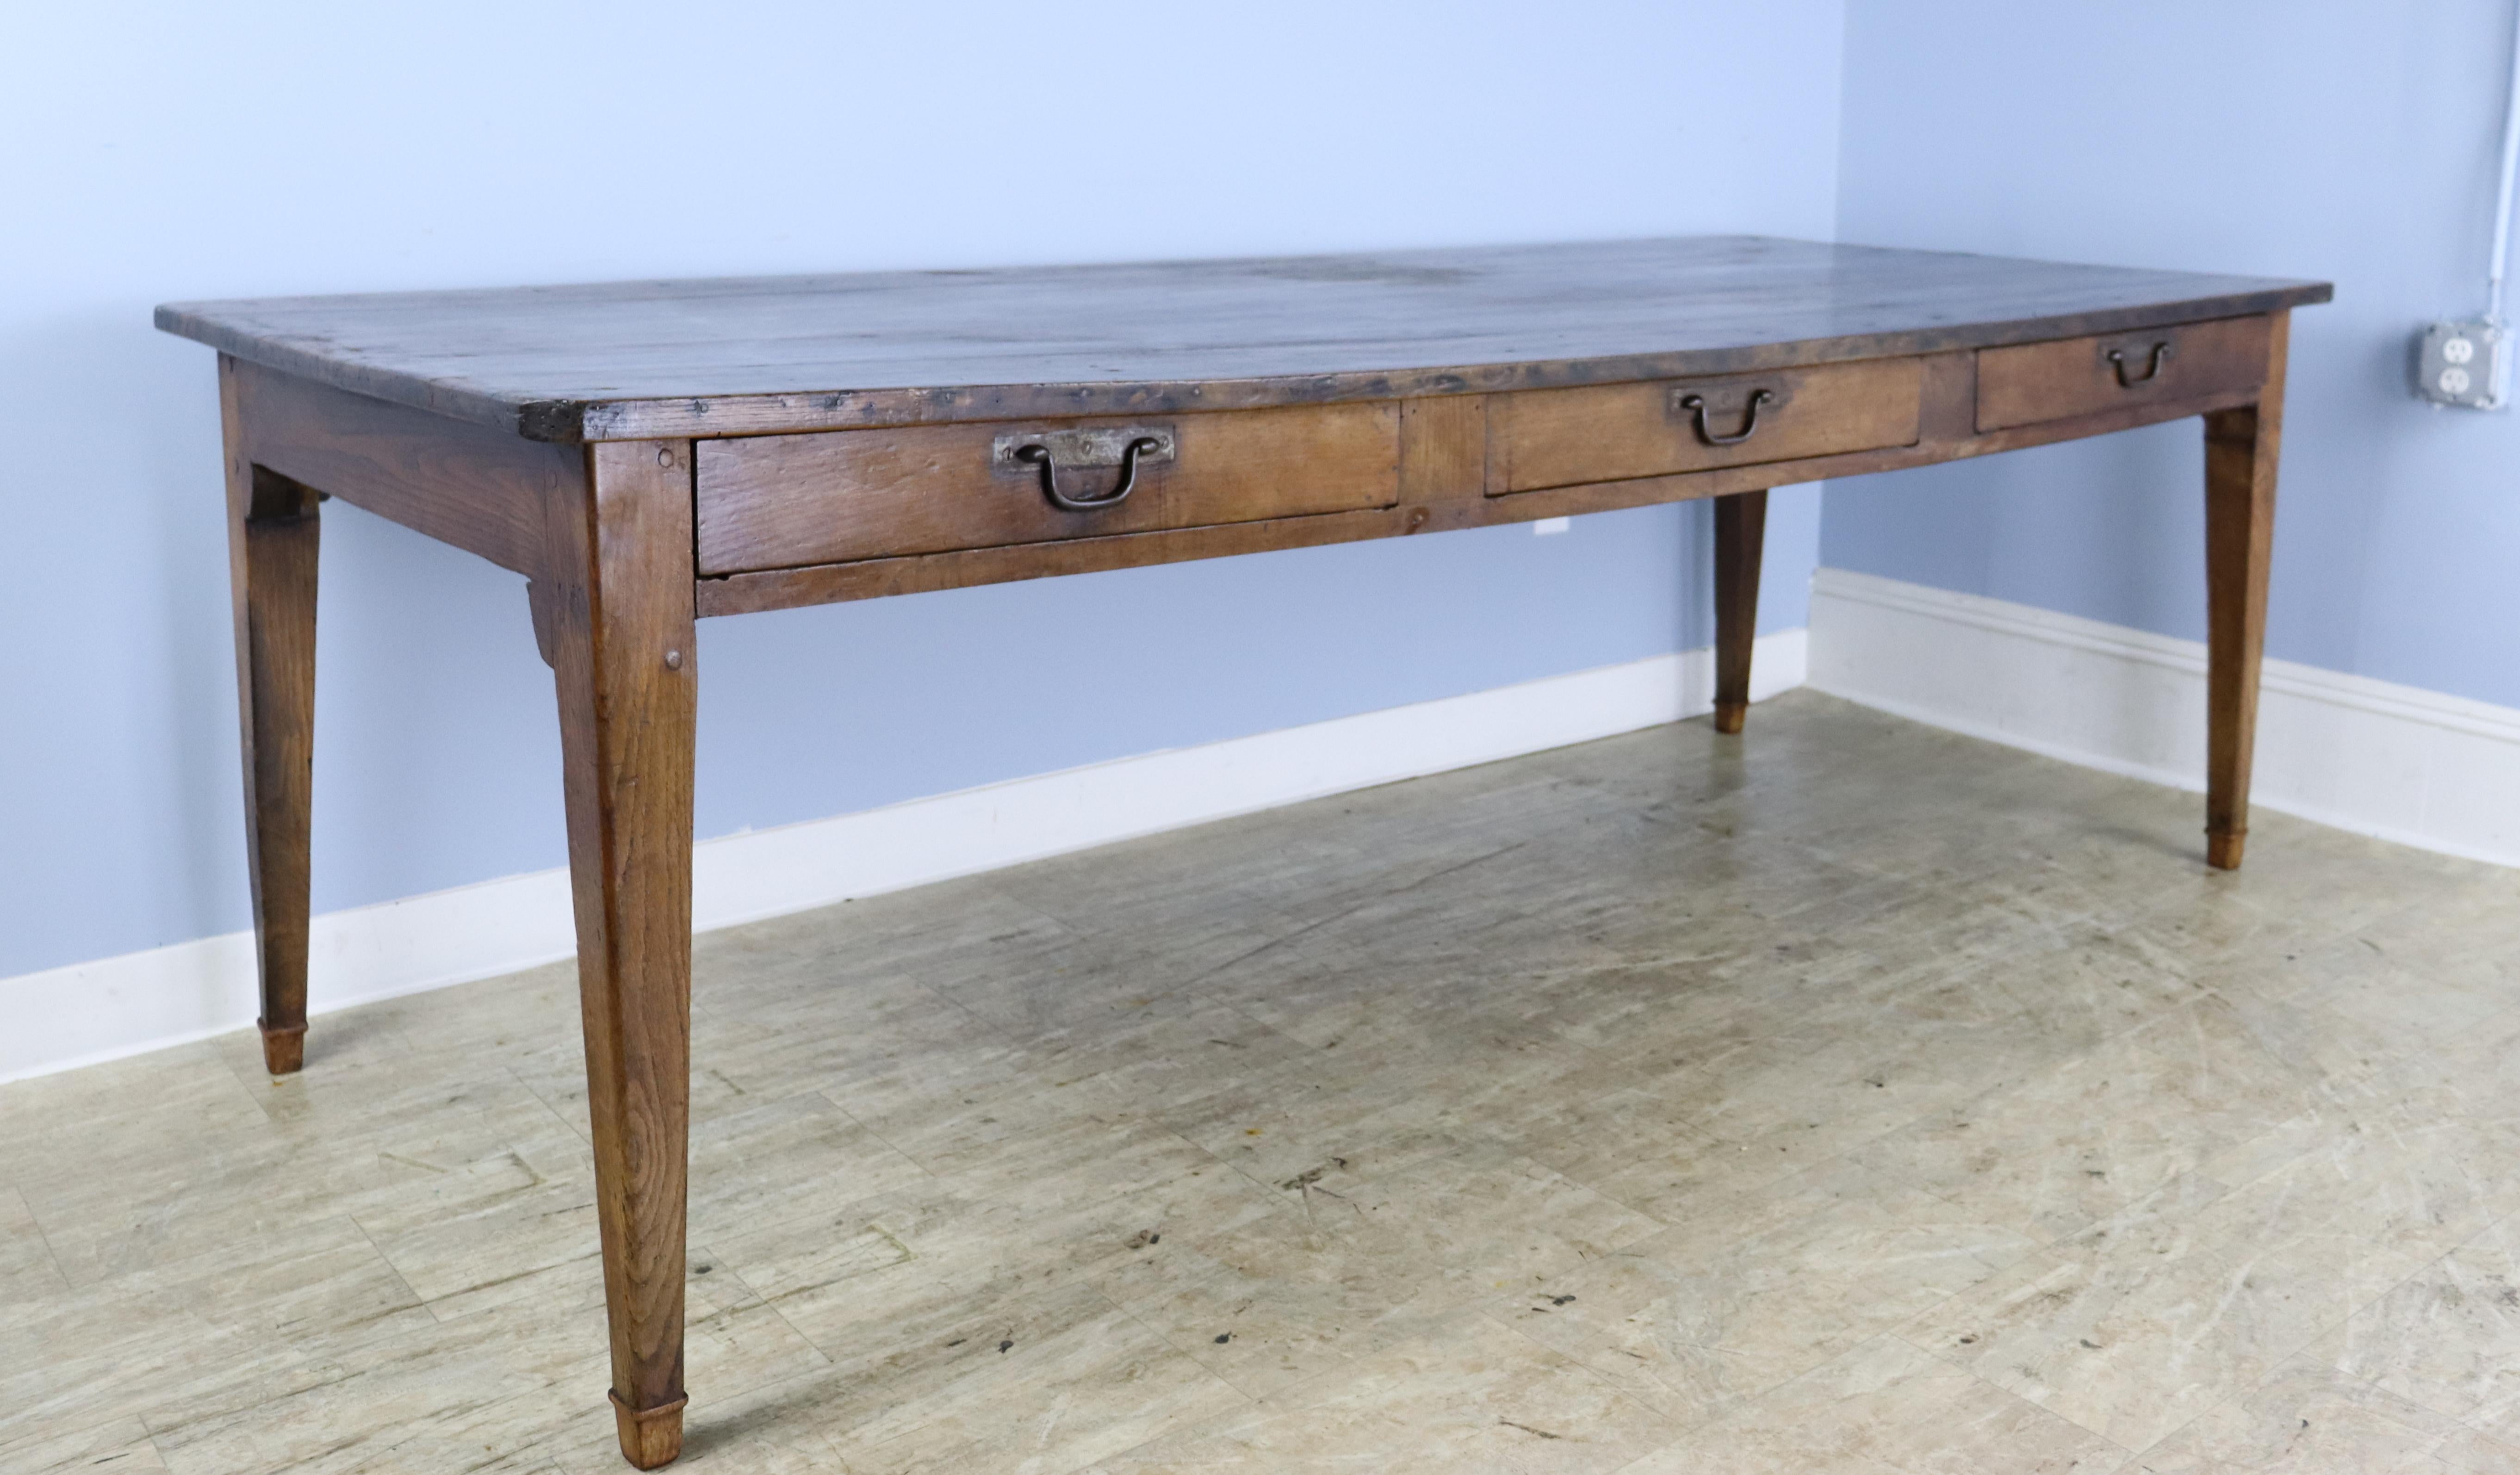 A classic dark pine farm table with three deep drawers in the apron. The table top is in good condition with nice color and patina. Iron drop handles are replaced. Apron height of 23.5 inches is good for knees and there are 84 inches between the